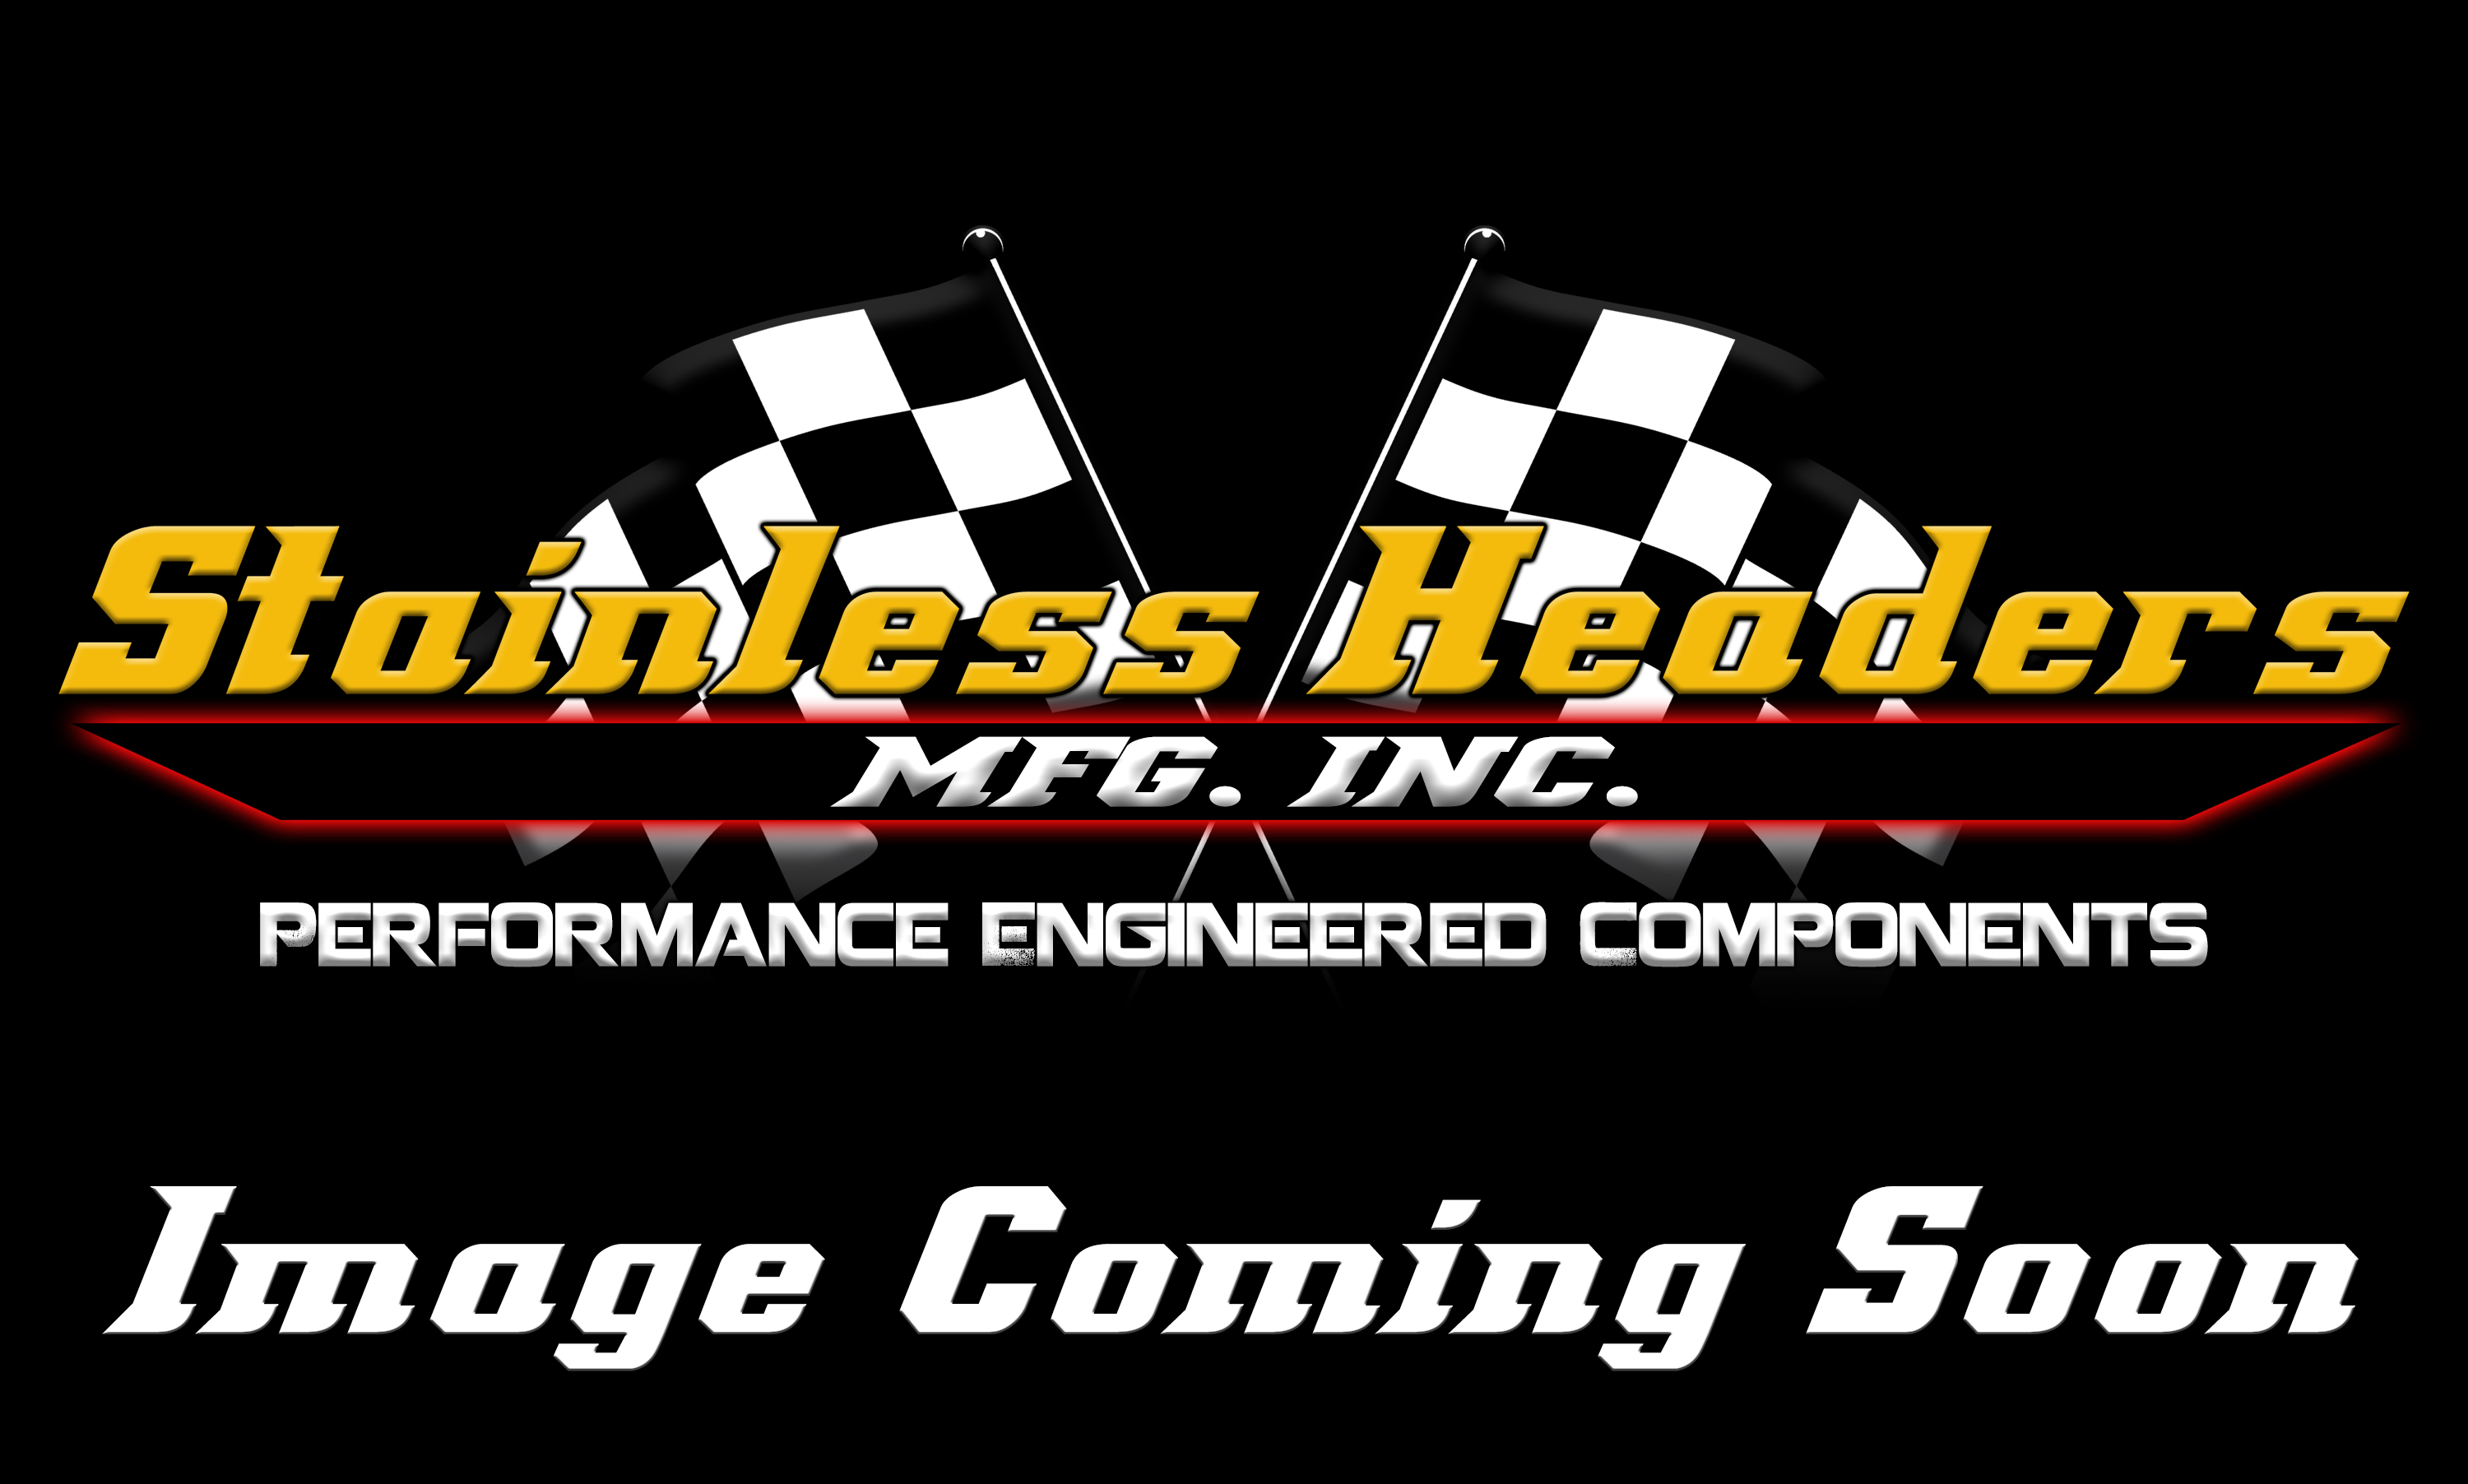 Stainless Headers - 2 1/2" Primary 8 into 1 Performance Merge Collector-18ga 304ss - Image 1